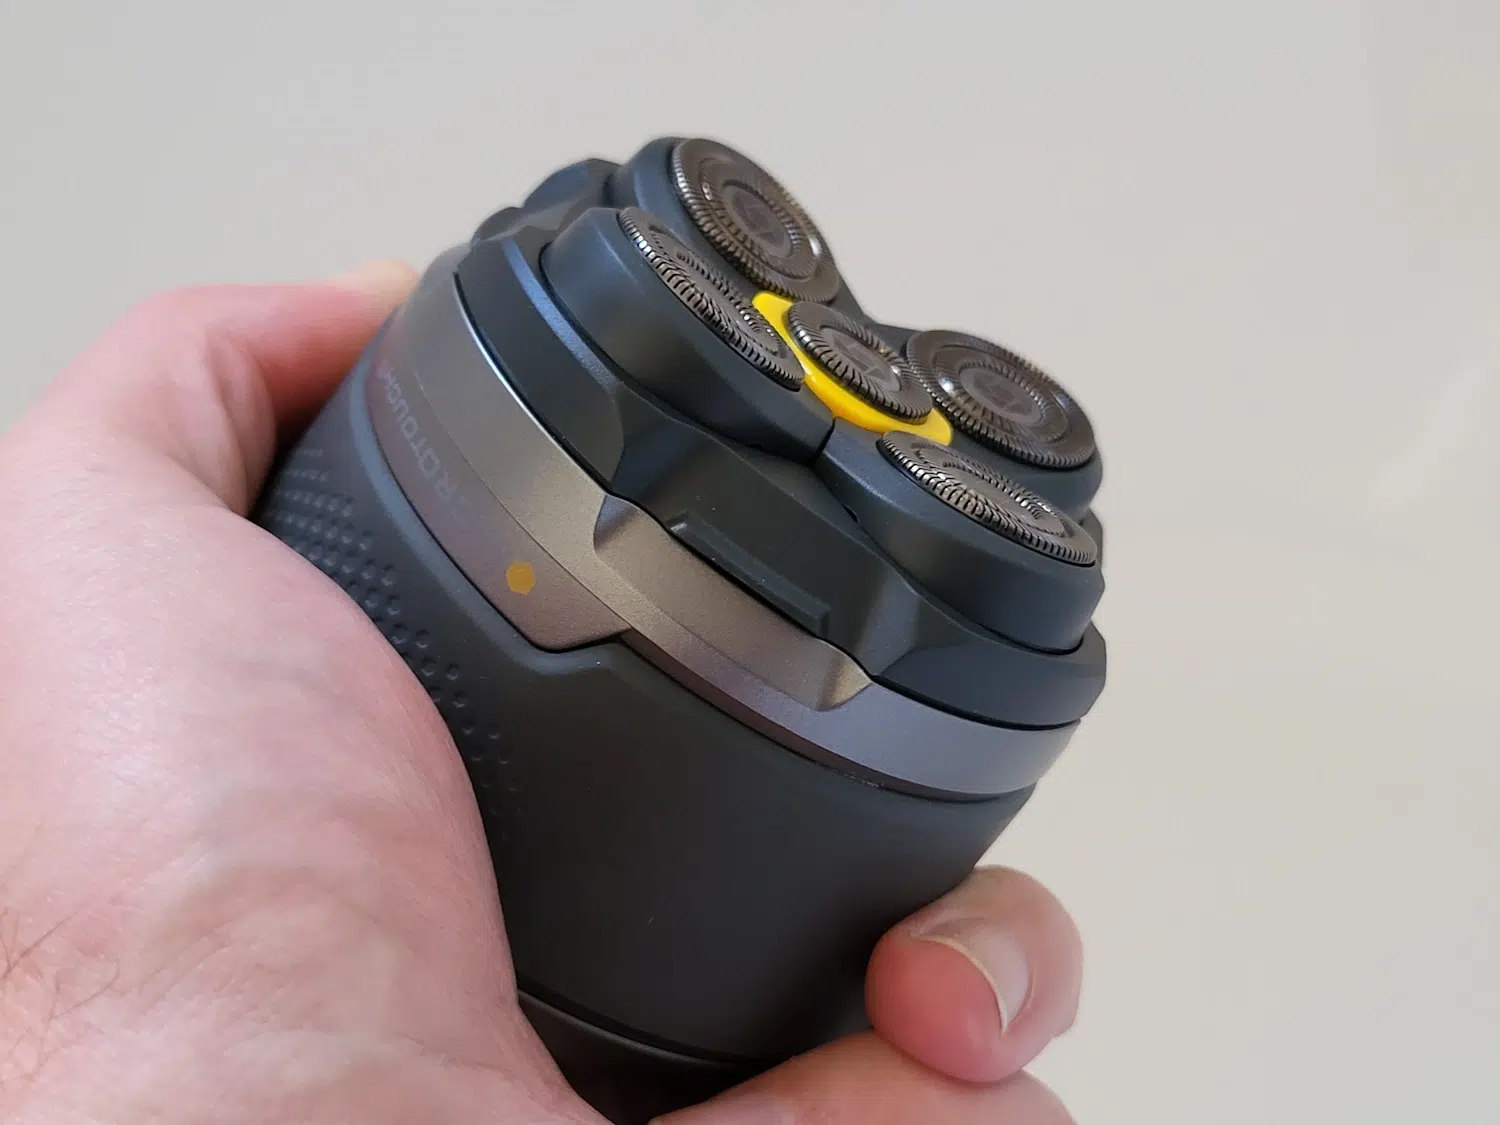 holding the Microtouch Titanium Head Shaver to show its ergonomics